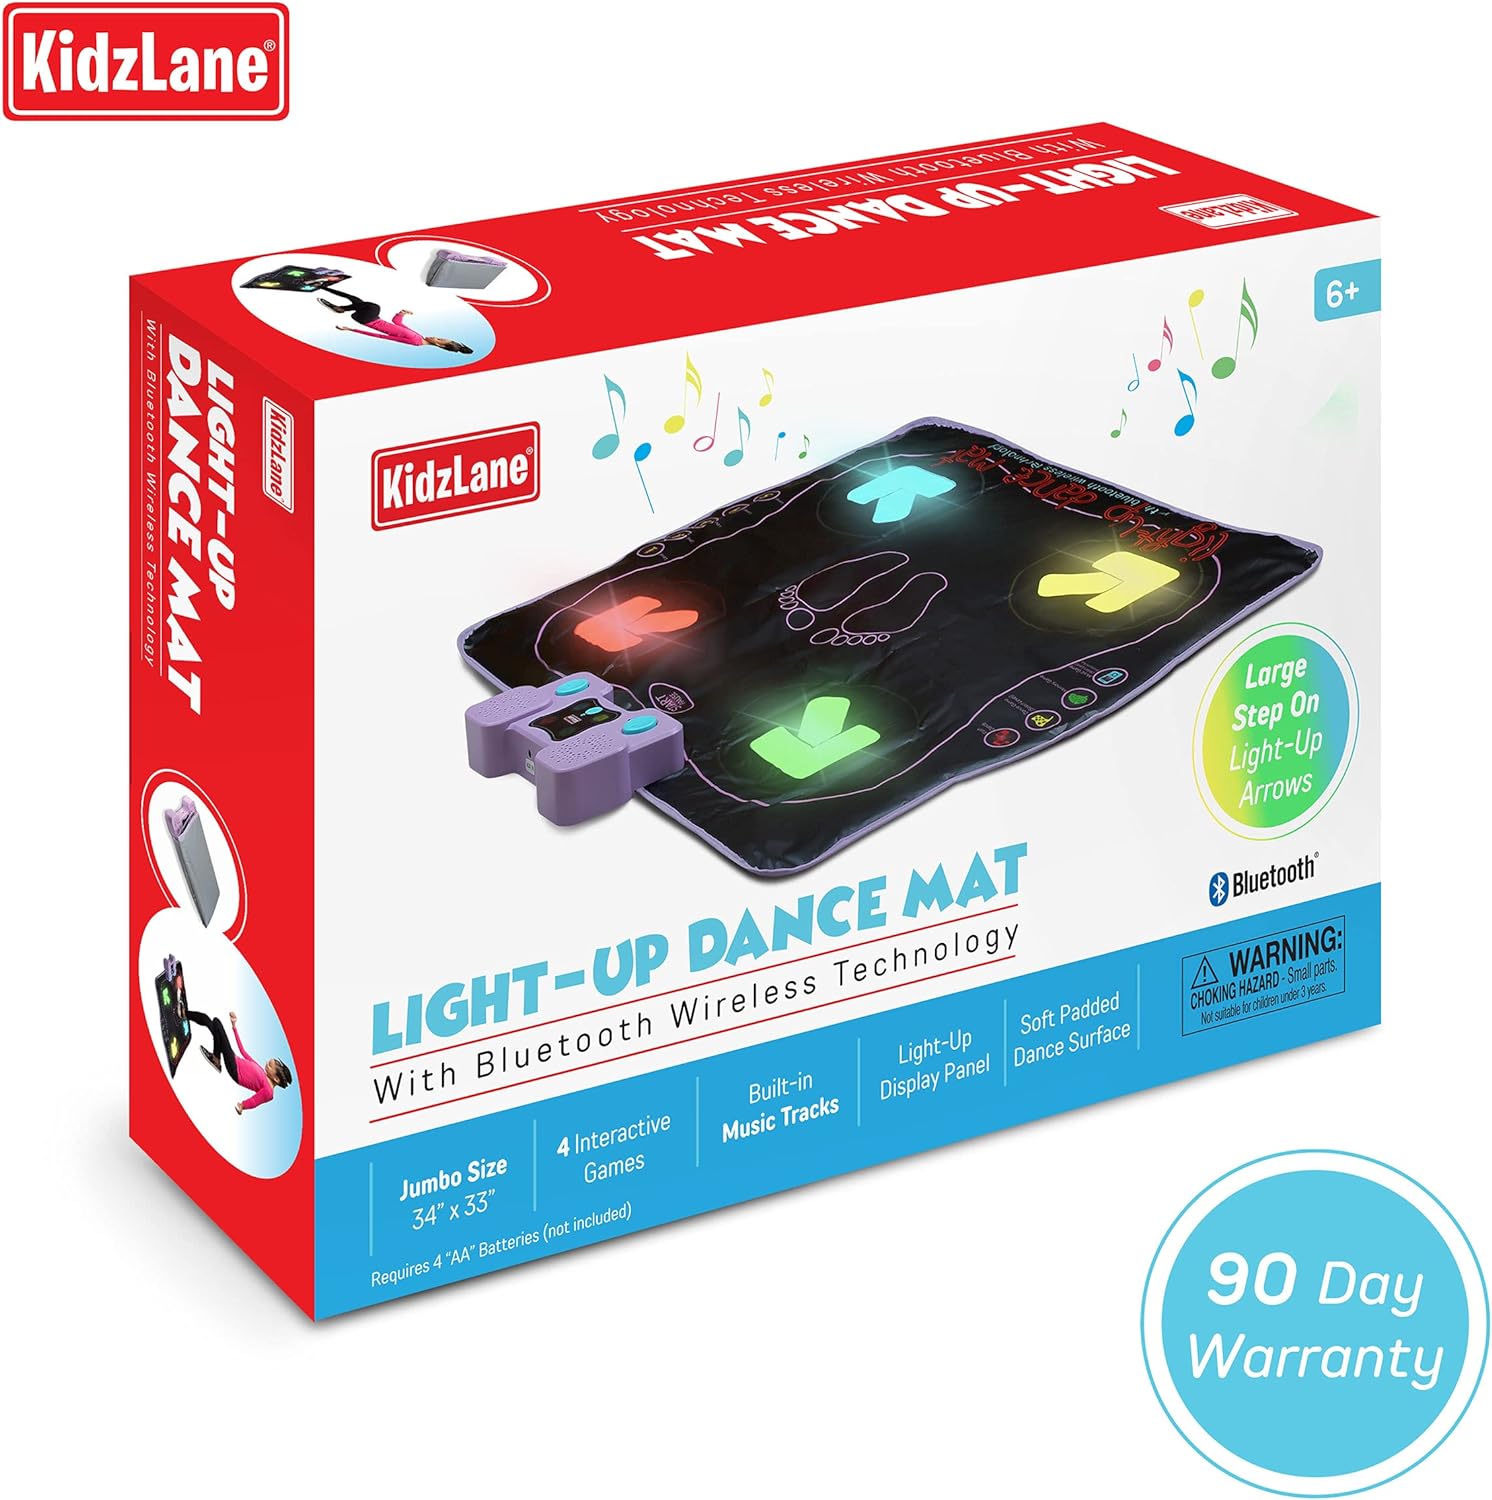 You are currently viewing Kidzlane Electronic Dance Mat Review